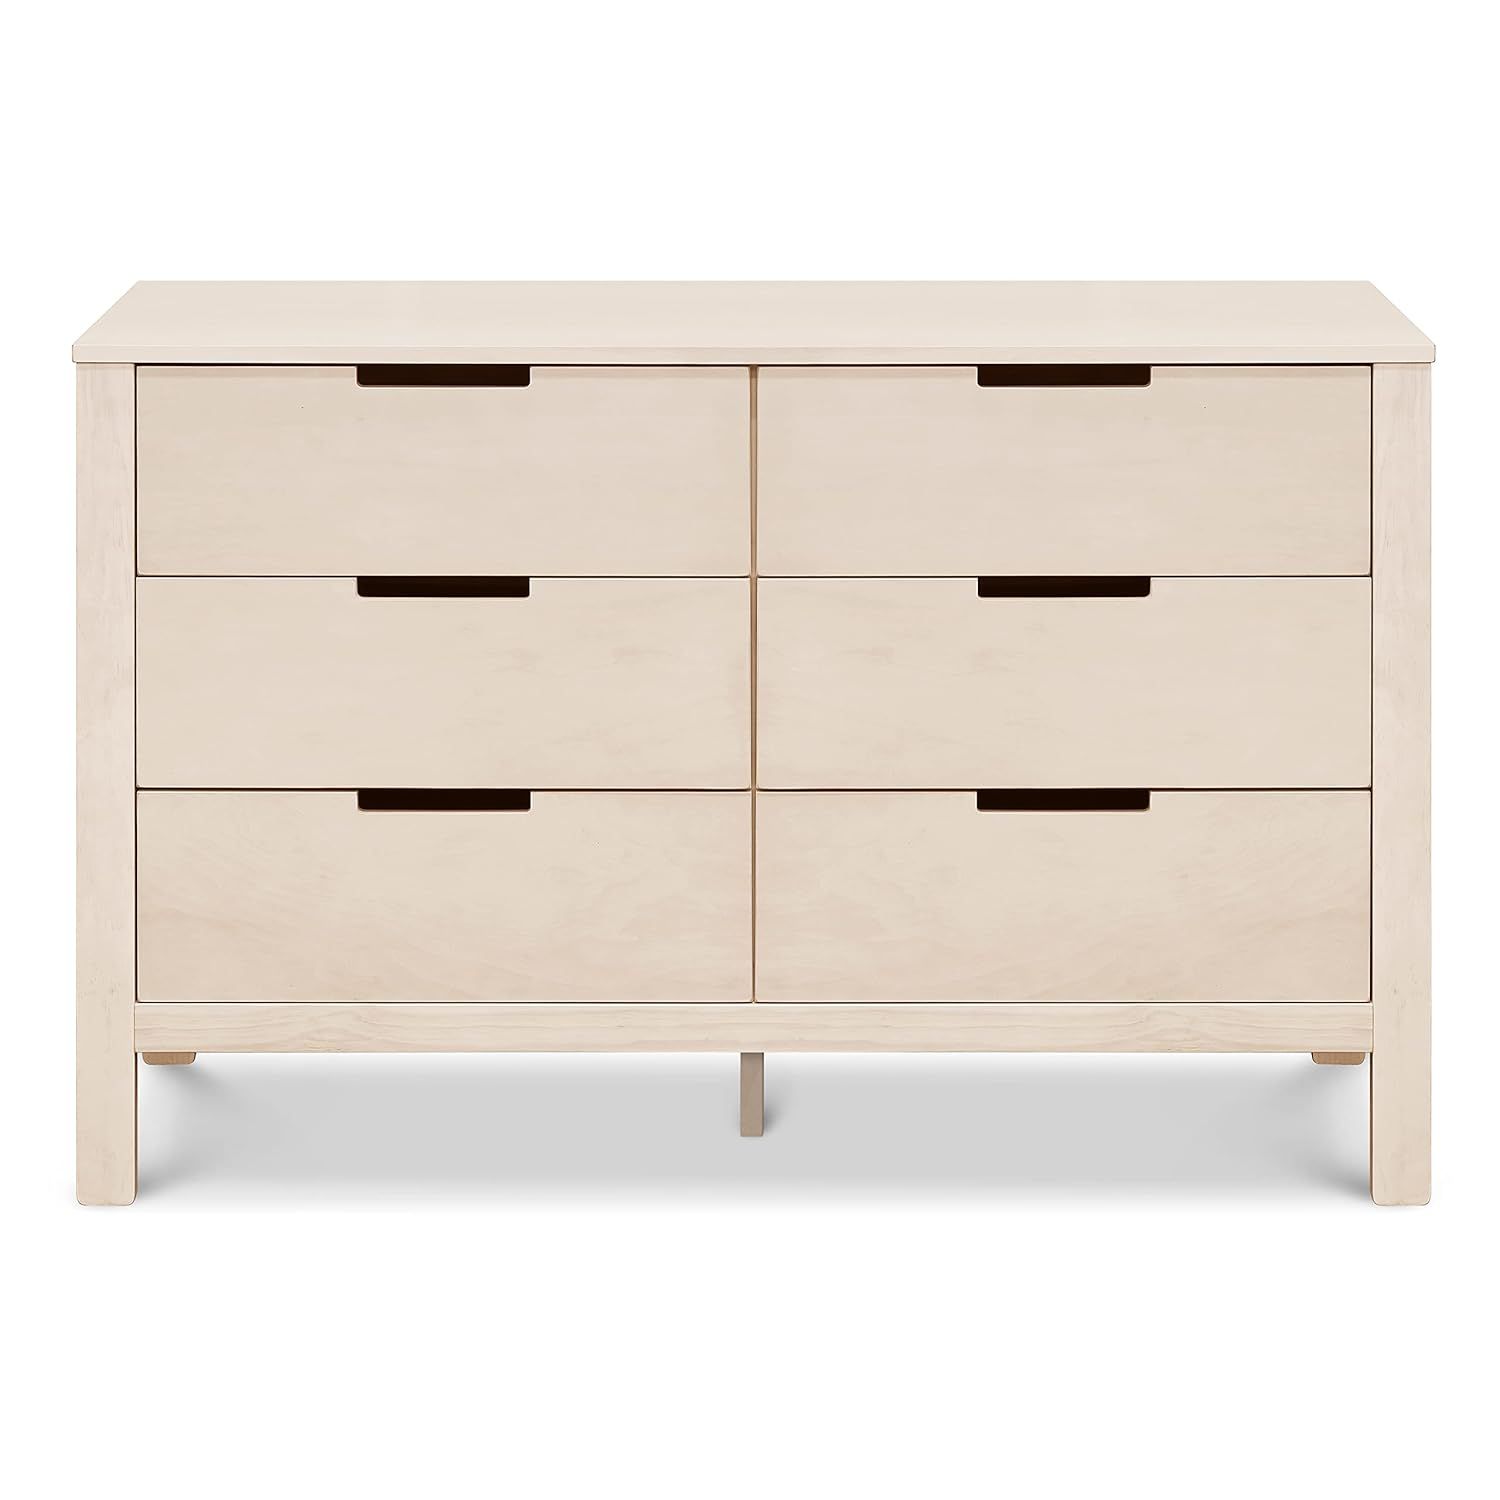 Carter's by DaVinci Double Colby 6-Drawer Dresser, Washed Natural | Amazon (US)